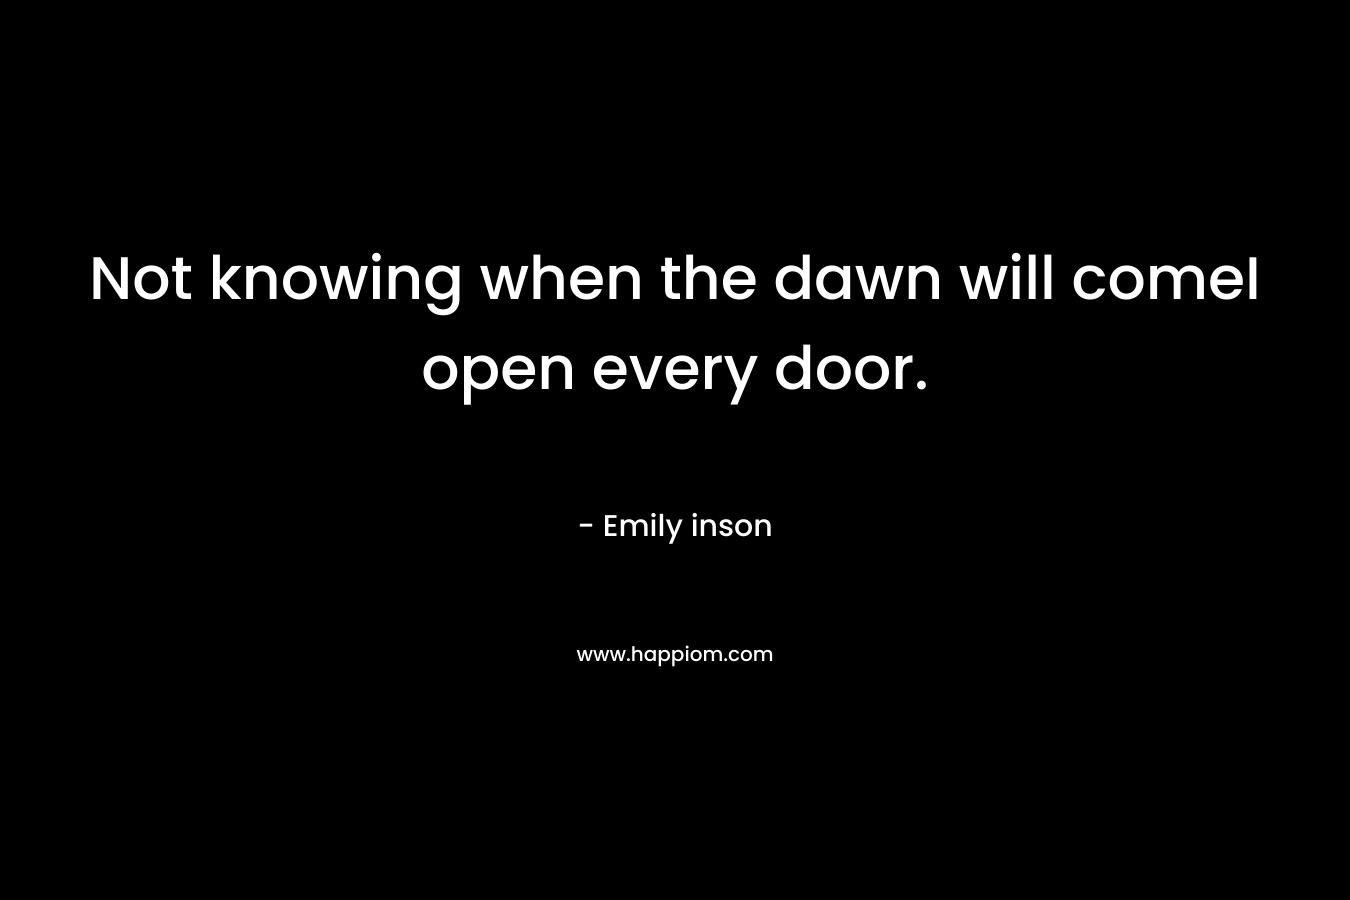 Not knowing when the dawn will comeI open every door.